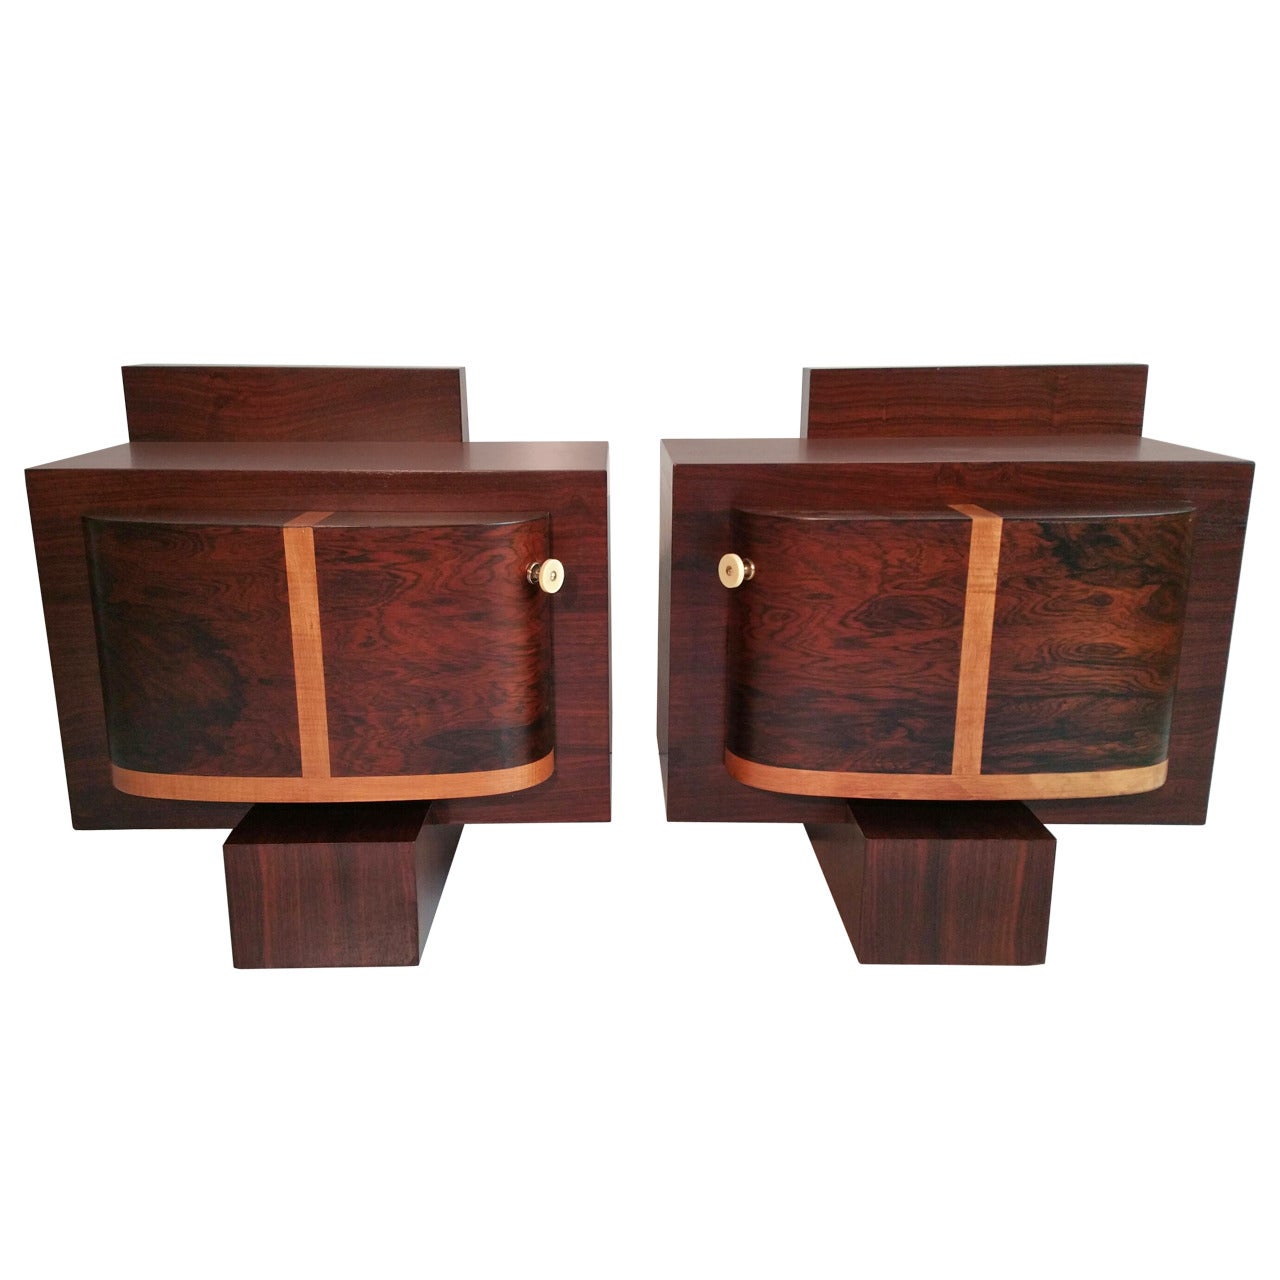 French Art Deco Stylized Rosewood Bedside Tables or Stands